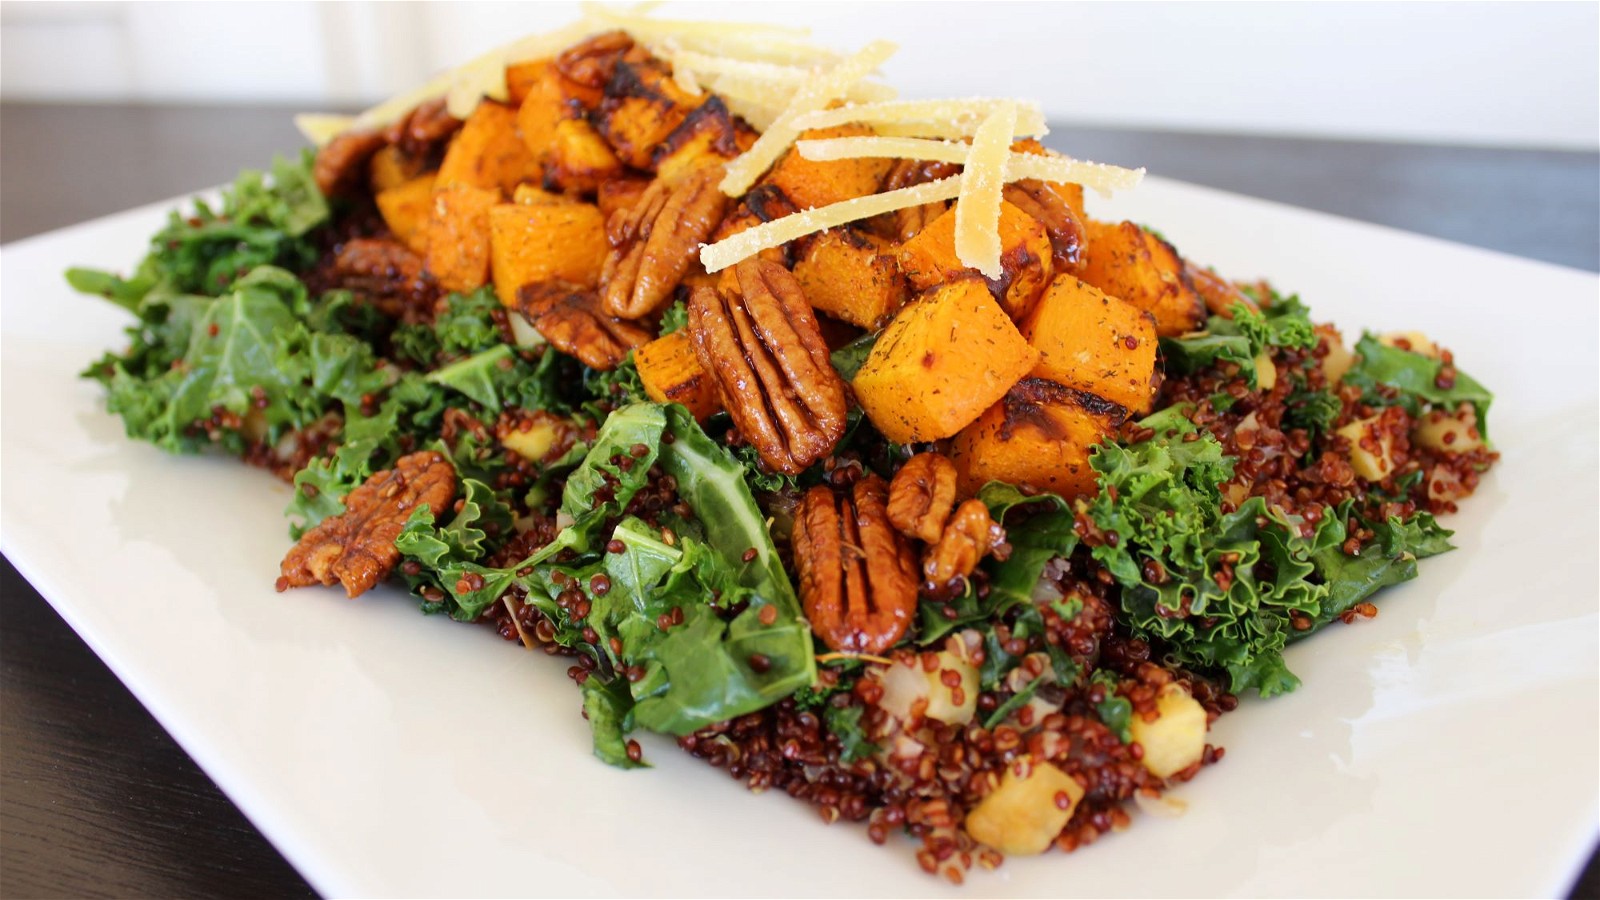 Image of Roasted Butternut Squash with Apple-Quinoa Salad